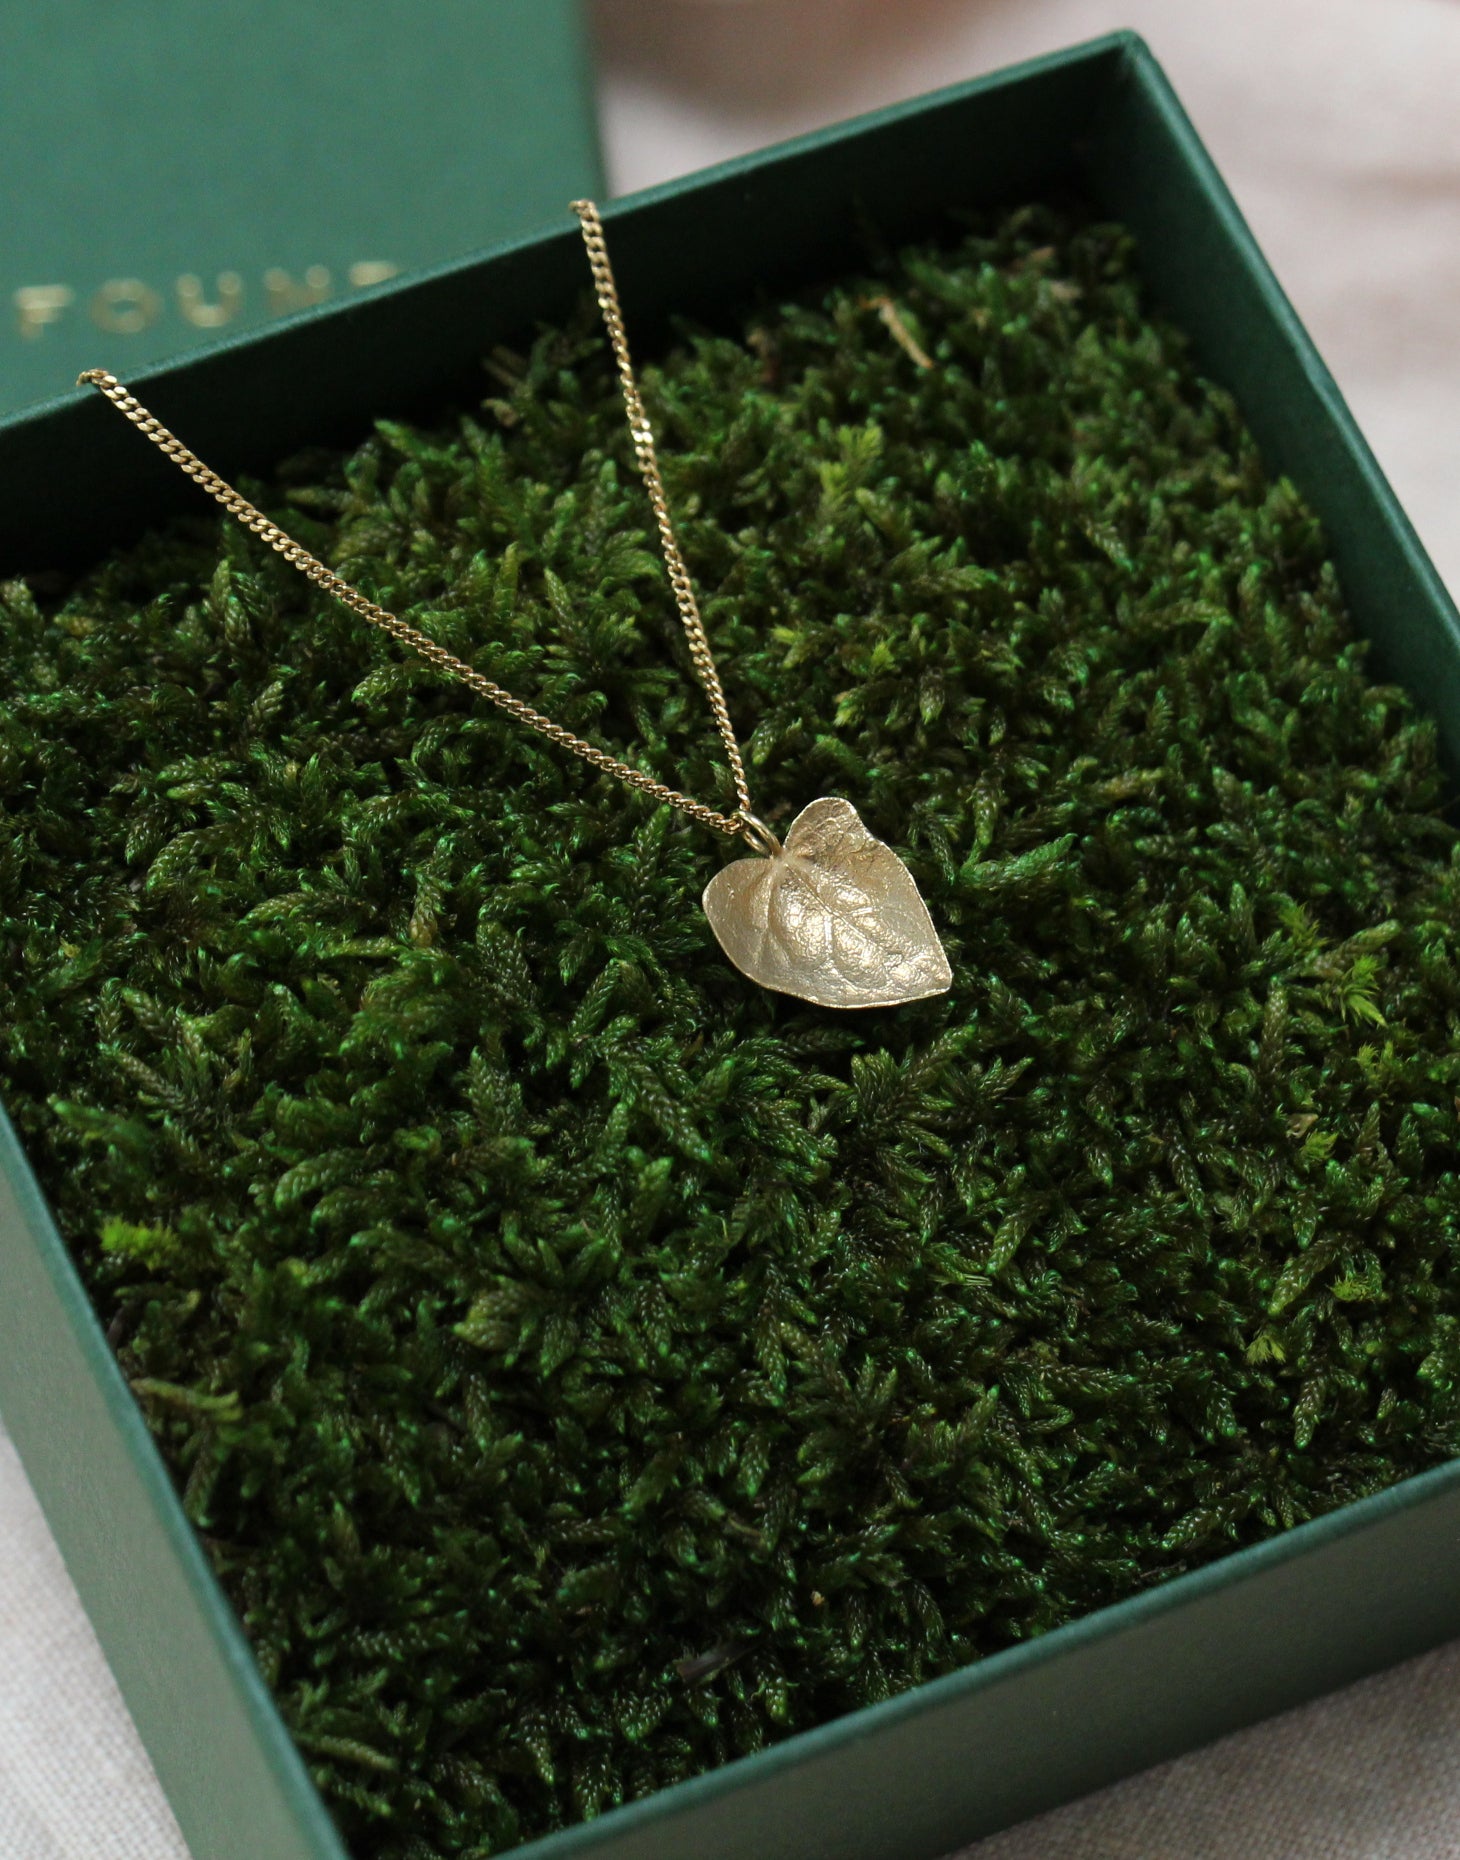 Cremation Ashes Necklaces | Necklaces for Ashes